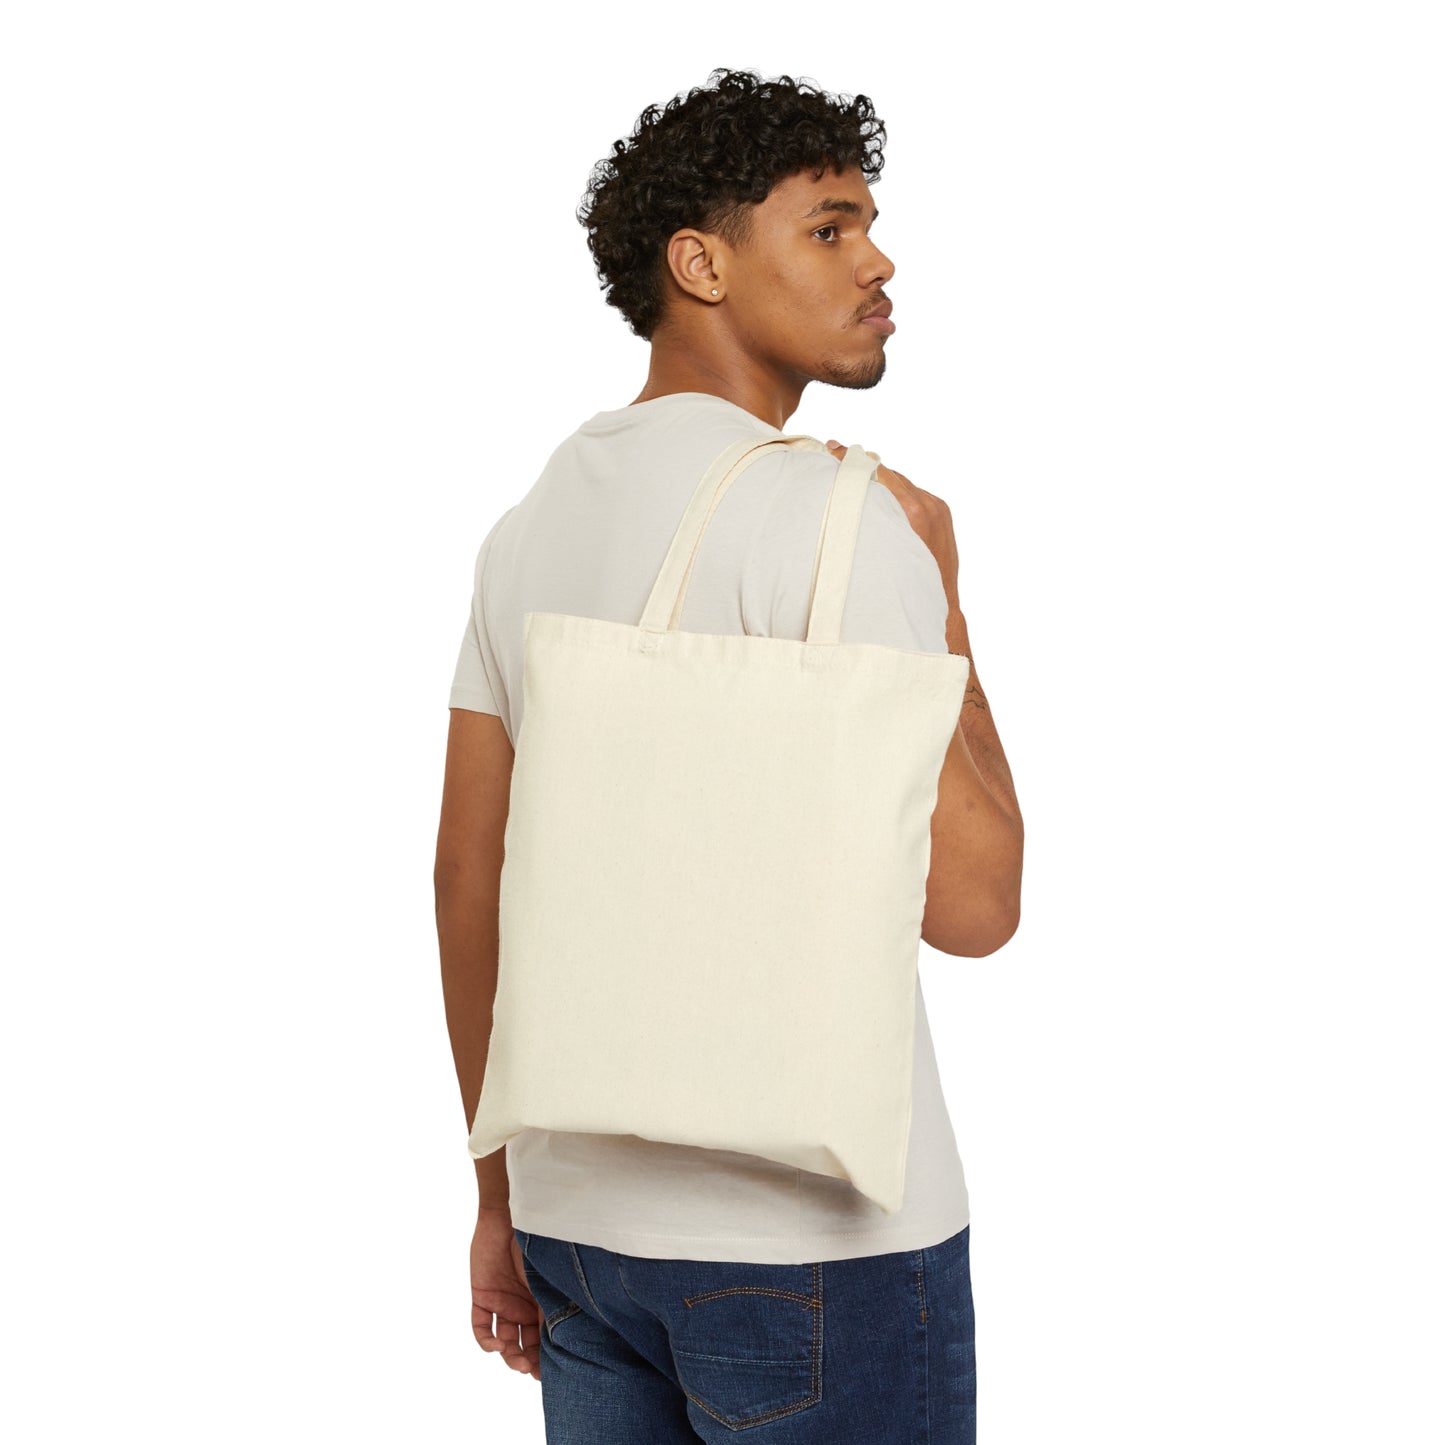 Topographical Anomaly Beacon Lighthouse Annihilation Minimal Art Canvas Shopping Cotton Tote Bag